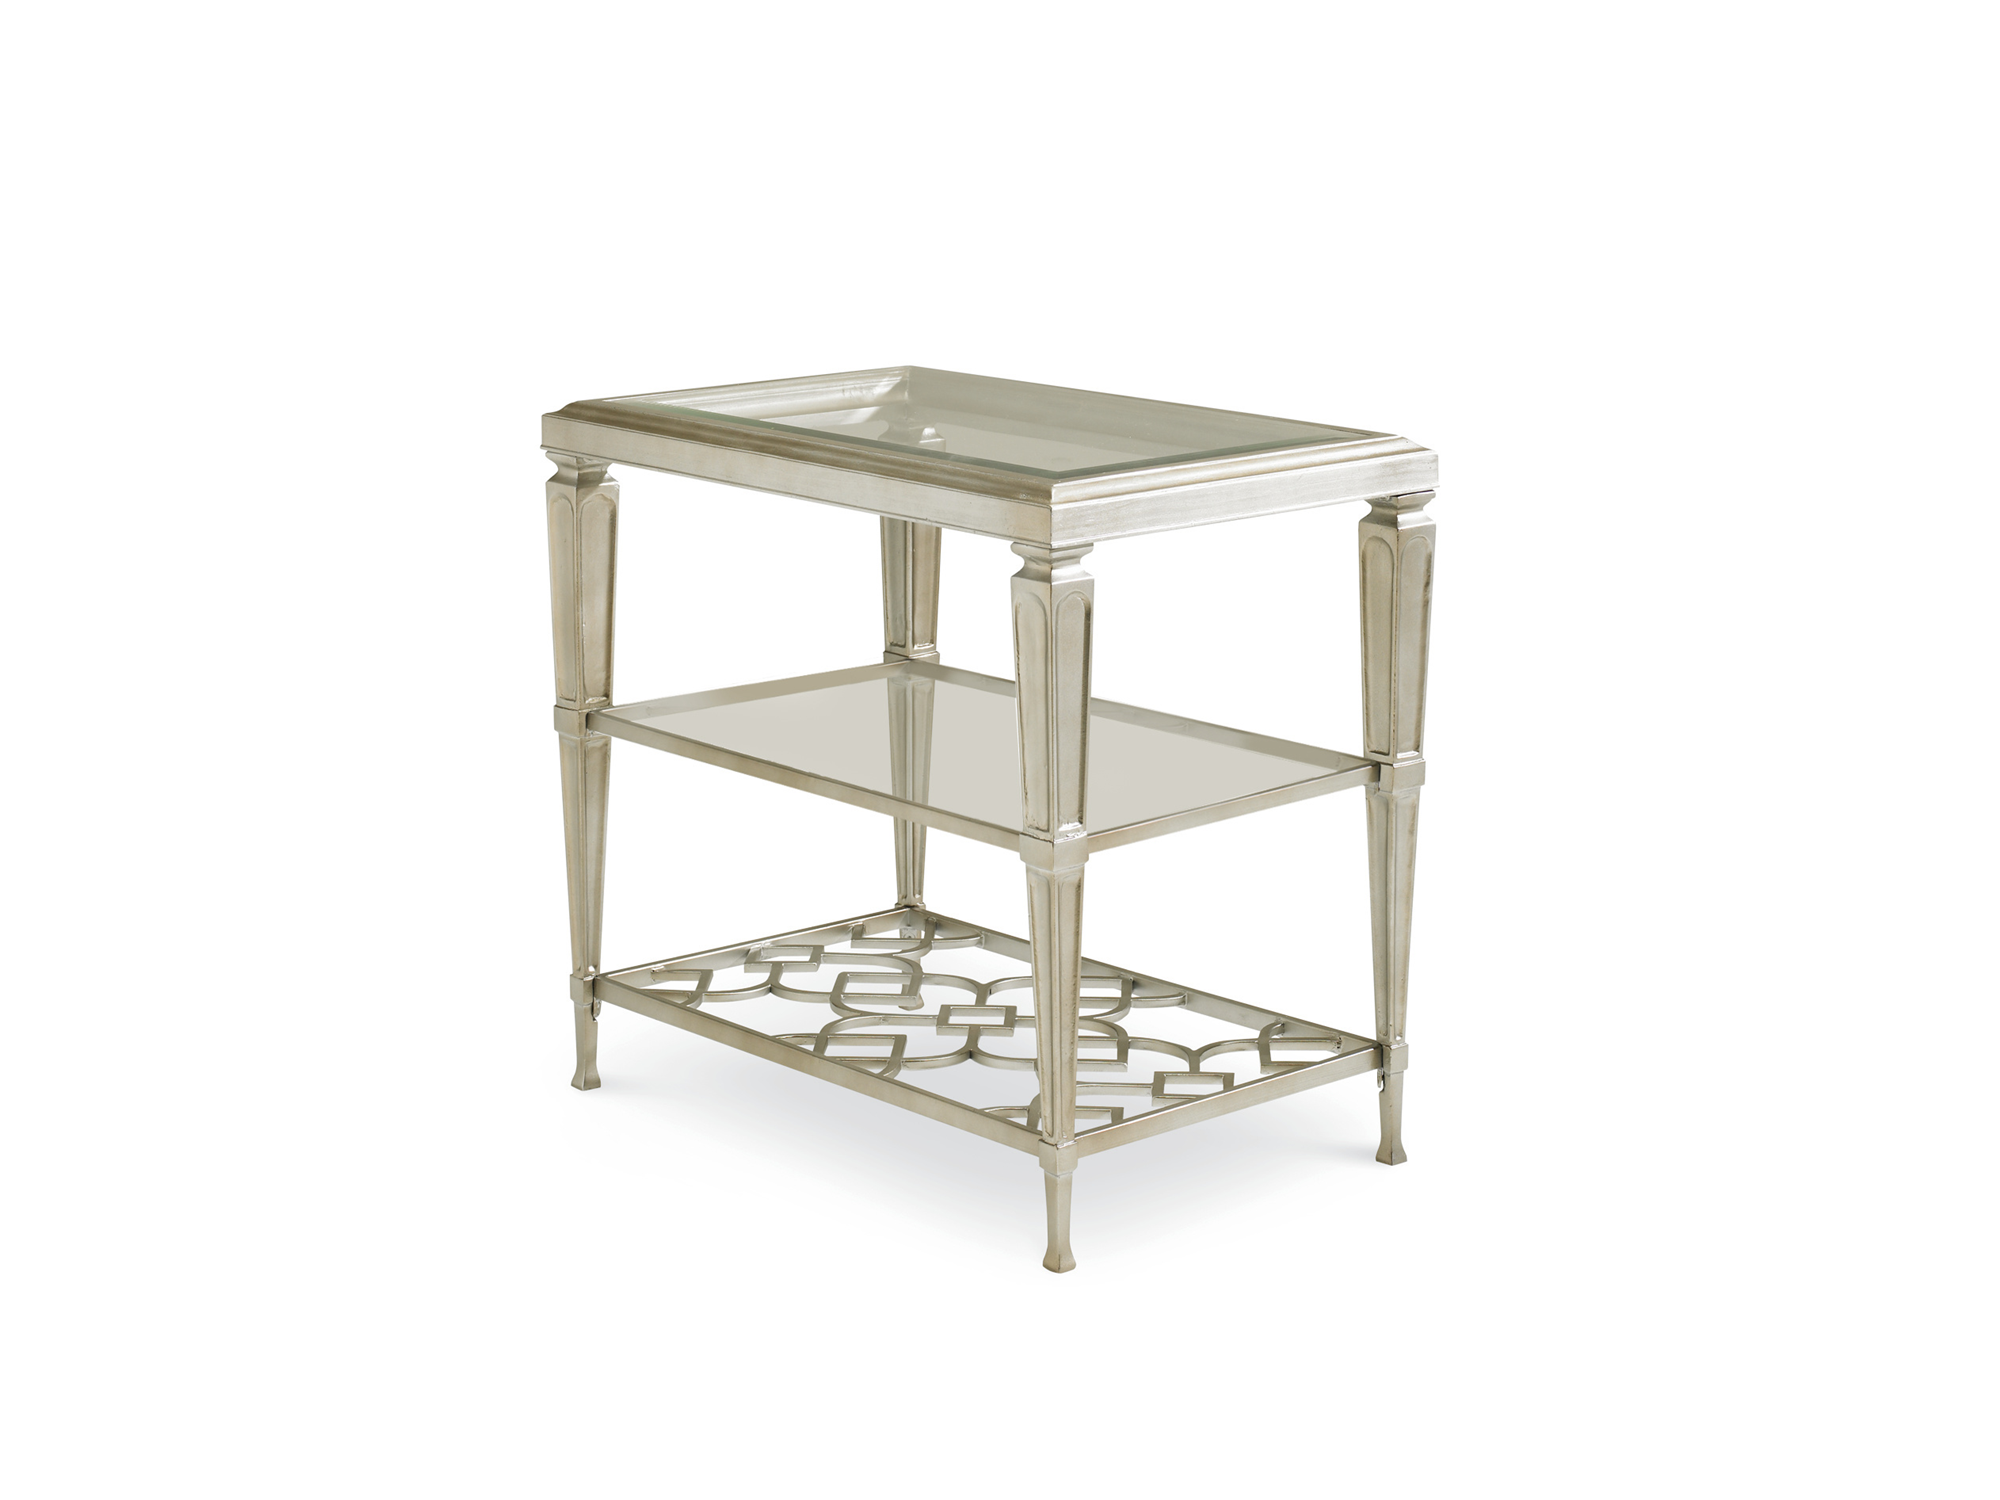 Babs Social Connections Side Table in Taupe Silver Leaf - Euro Living Furniture